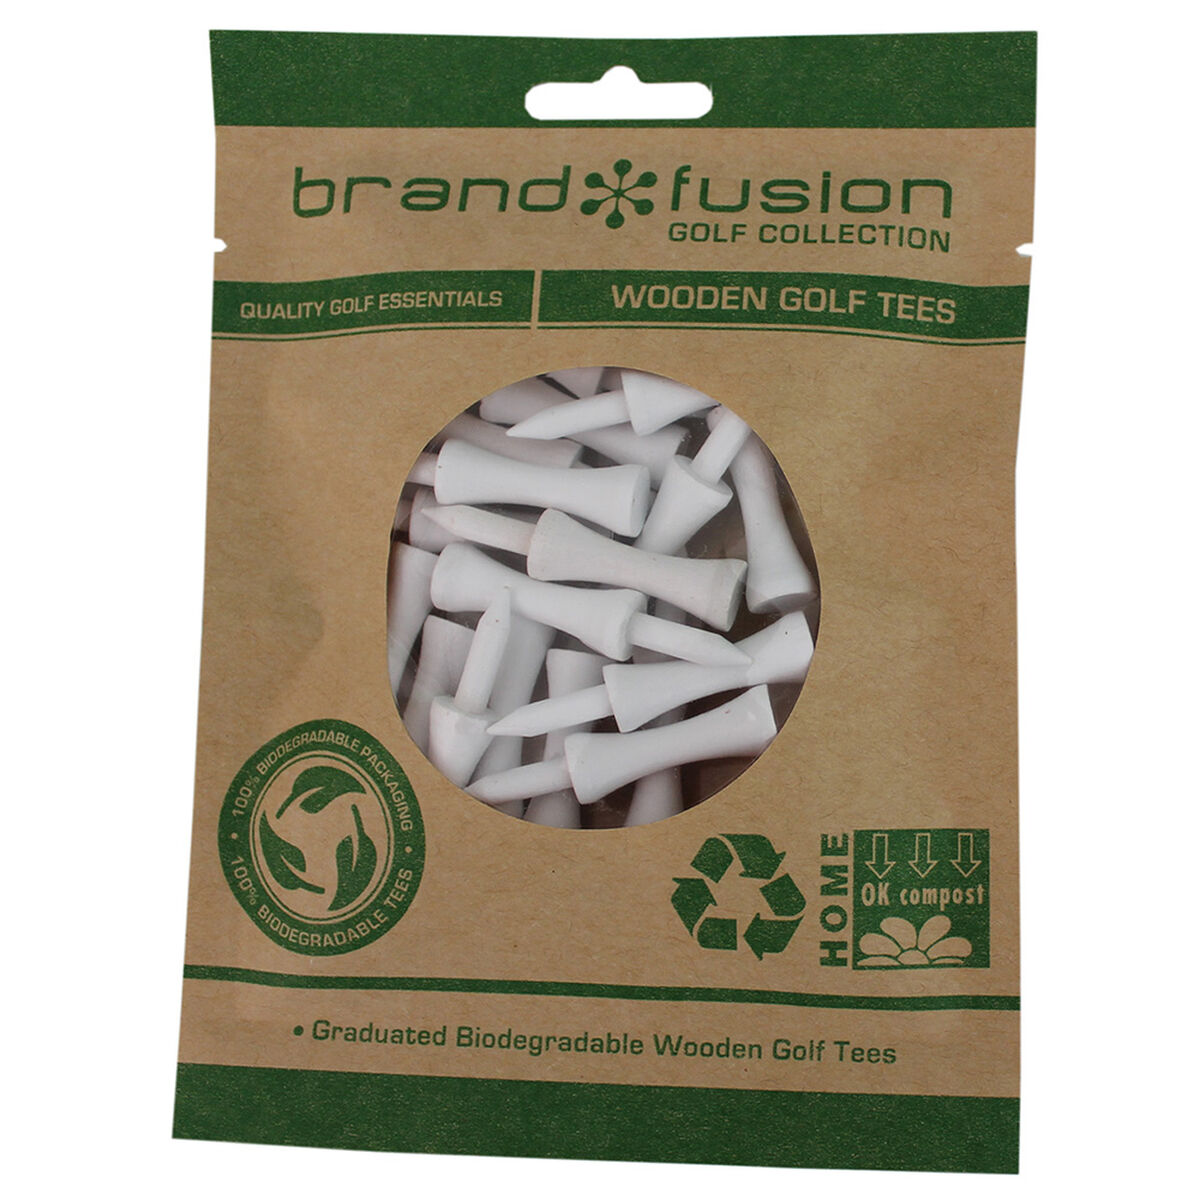 BrandFusion White Graduated Biodegradable Wooden Golf Tees, Size: 51mm | American Golf von BrandFusion